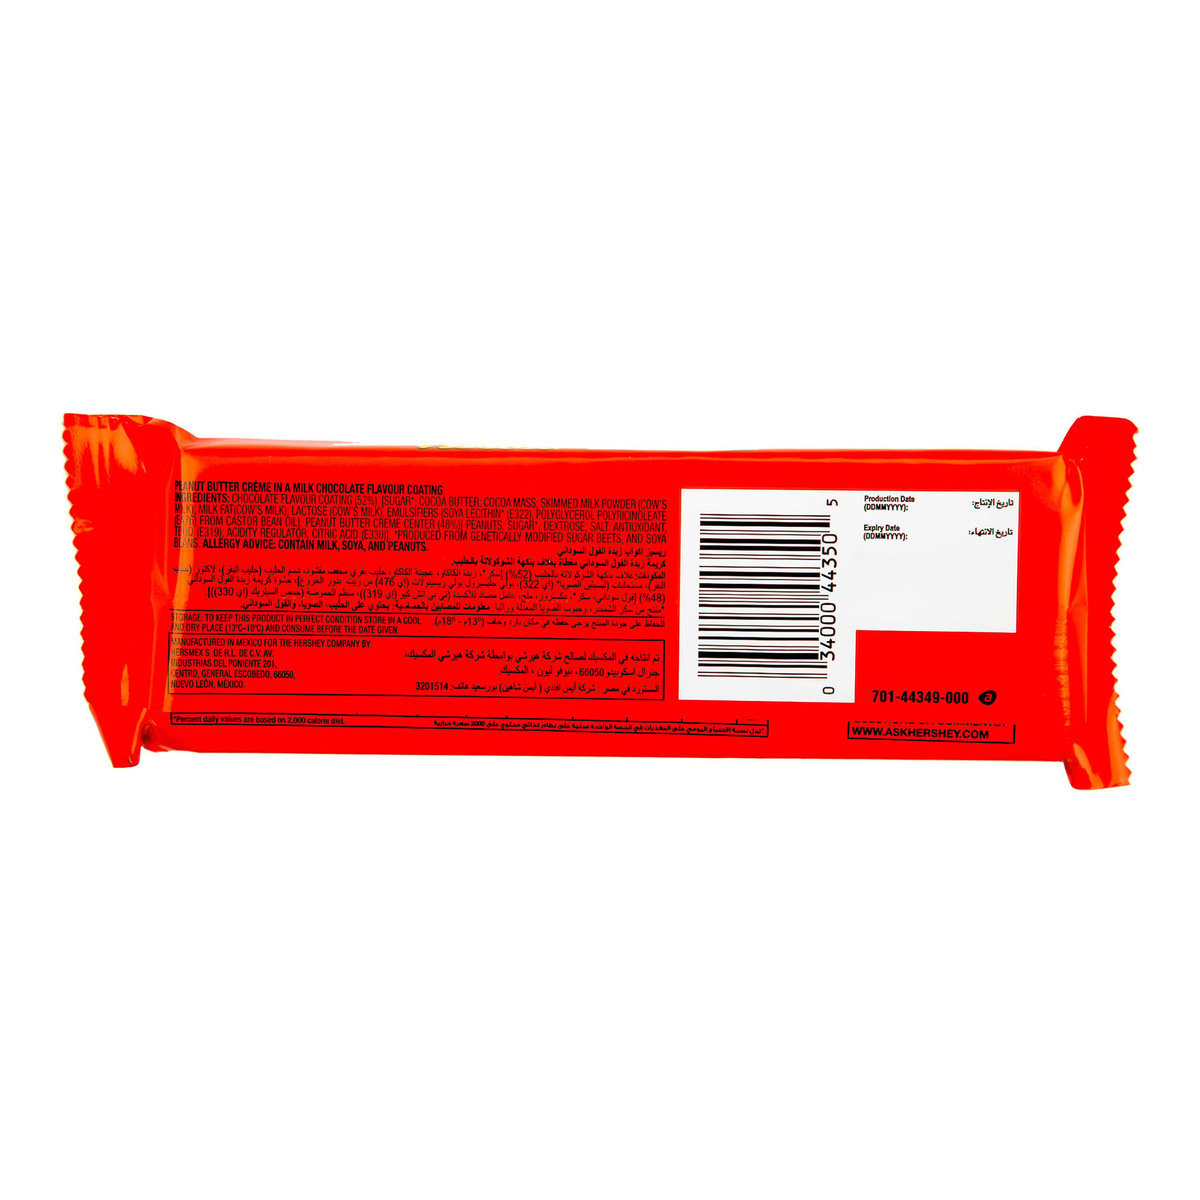 Reese's Milk Chocolate & Peanut Butter Cups 46 g